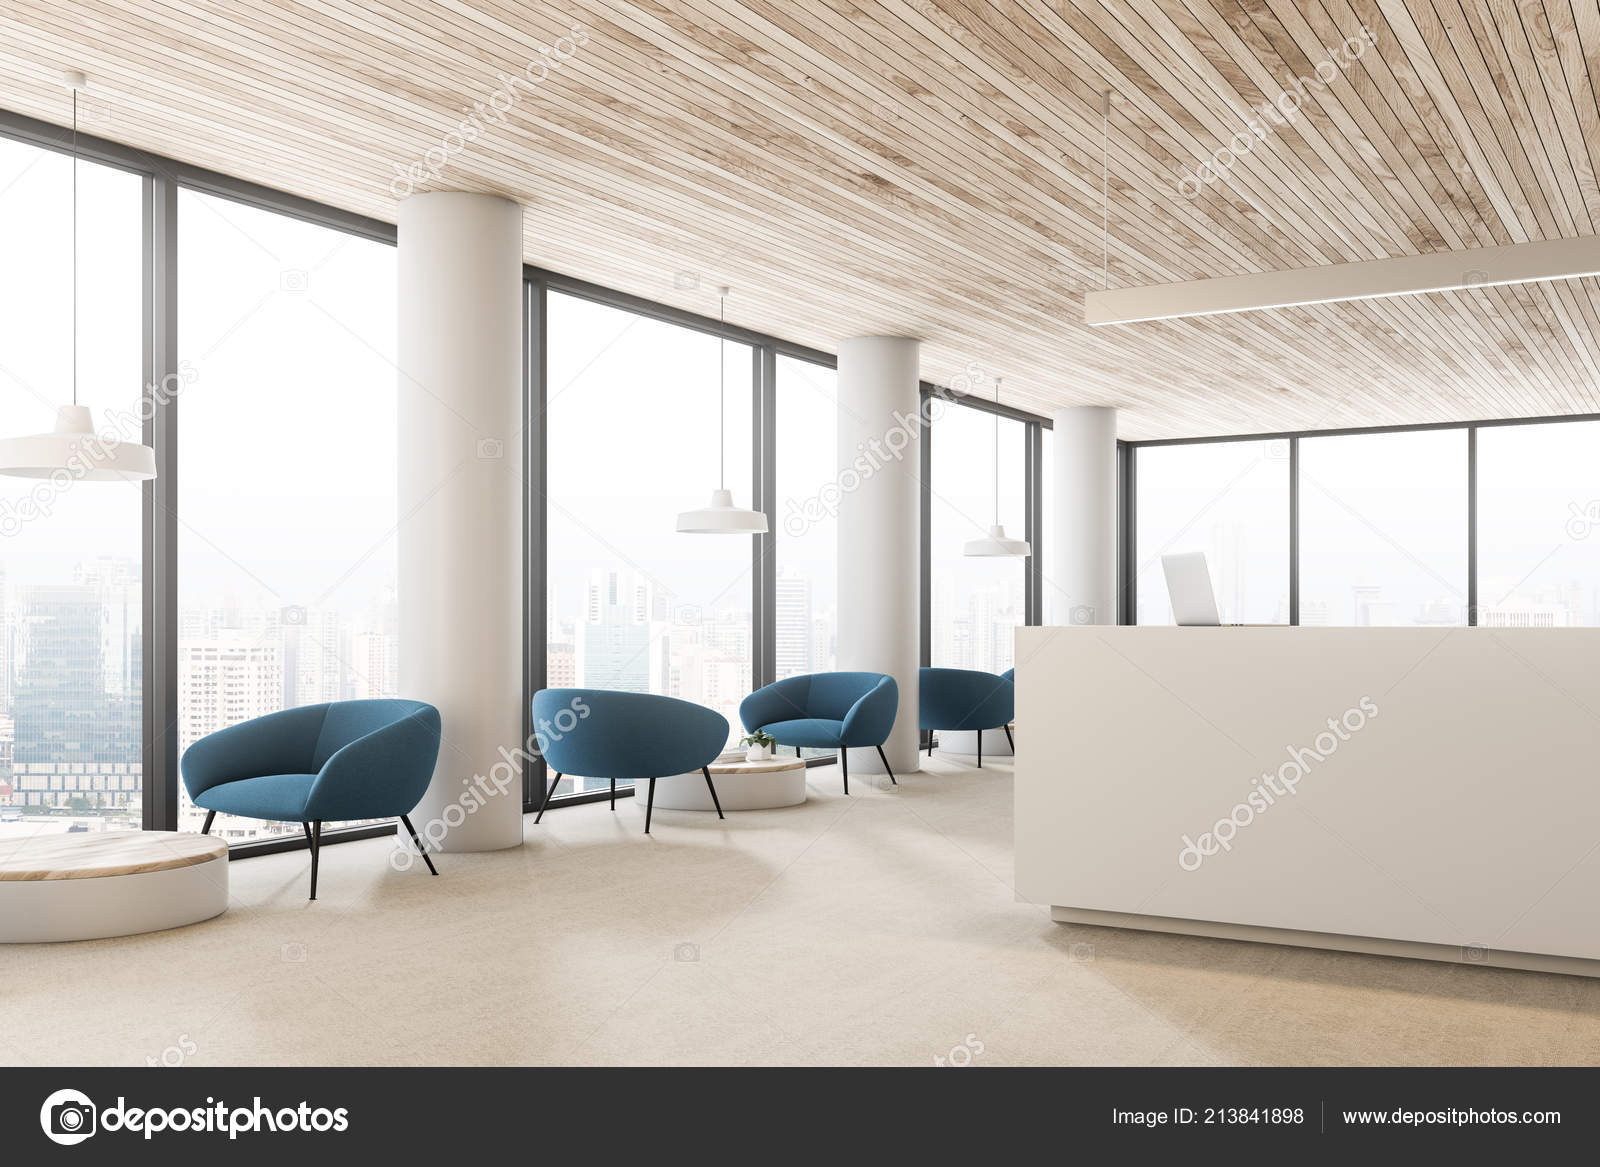 White Walls Columns Office Reception Hall Wooden Ceiling